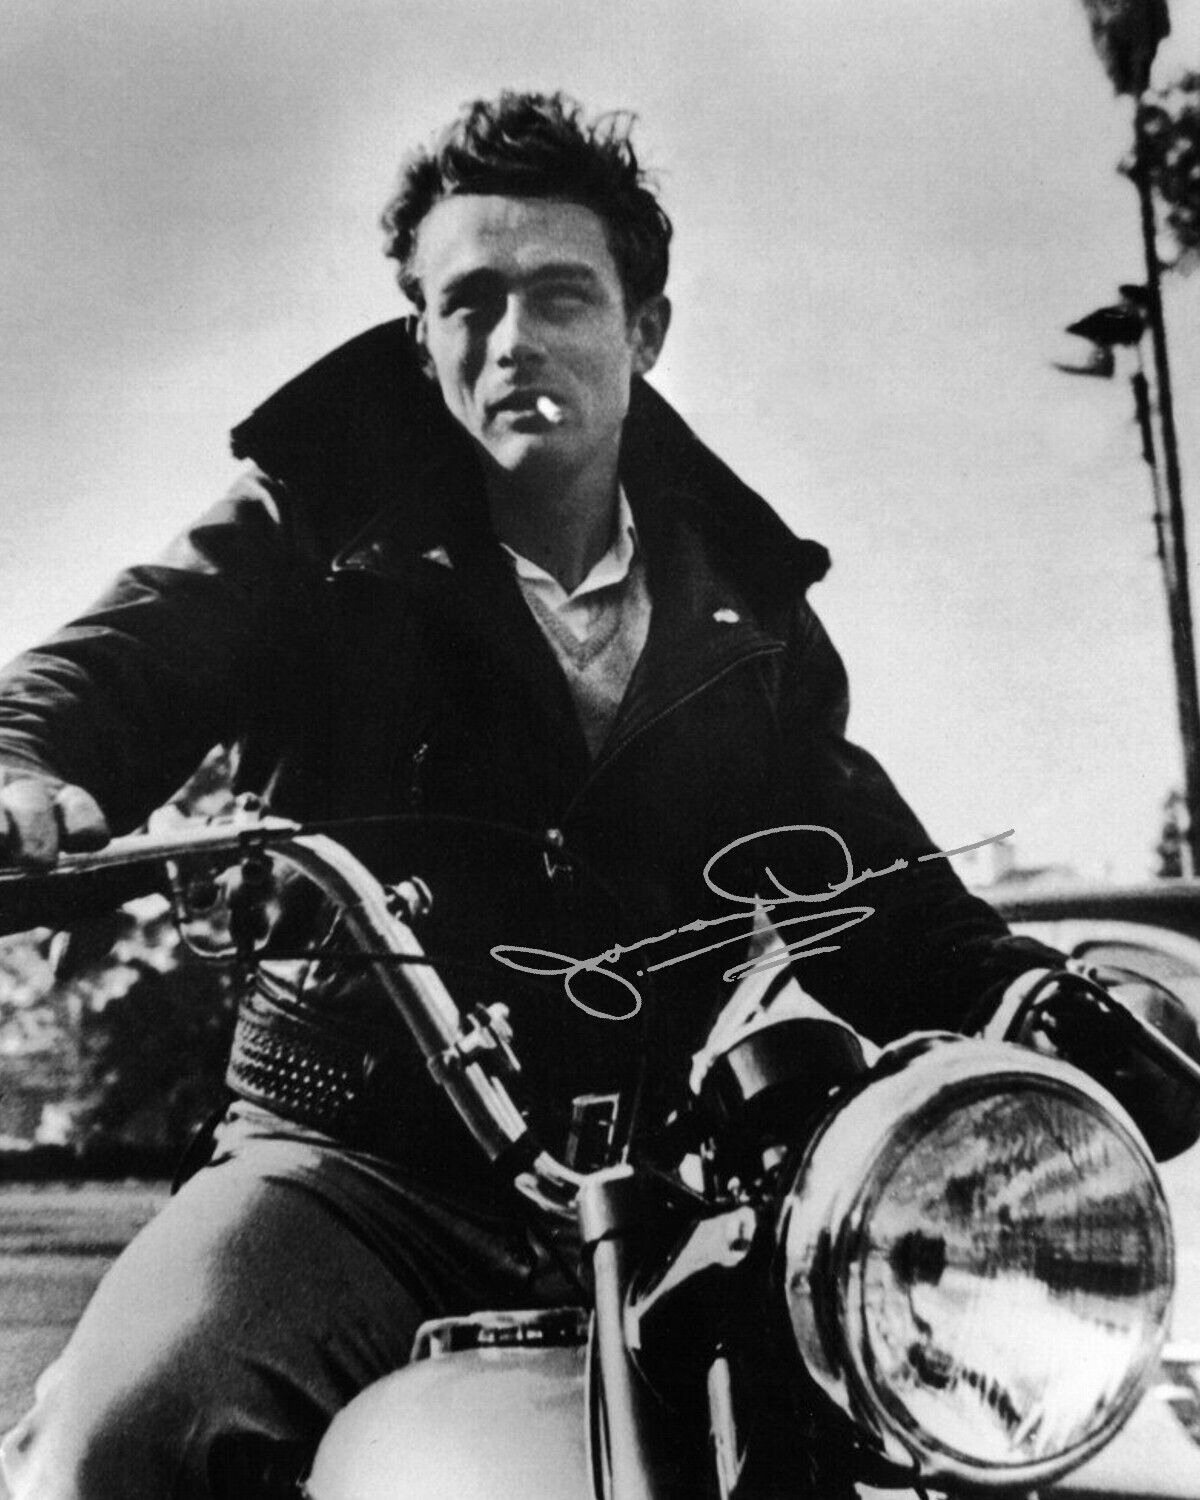 James dean On HIs Motorcycle  Vintage photo  8X10 a Rare find